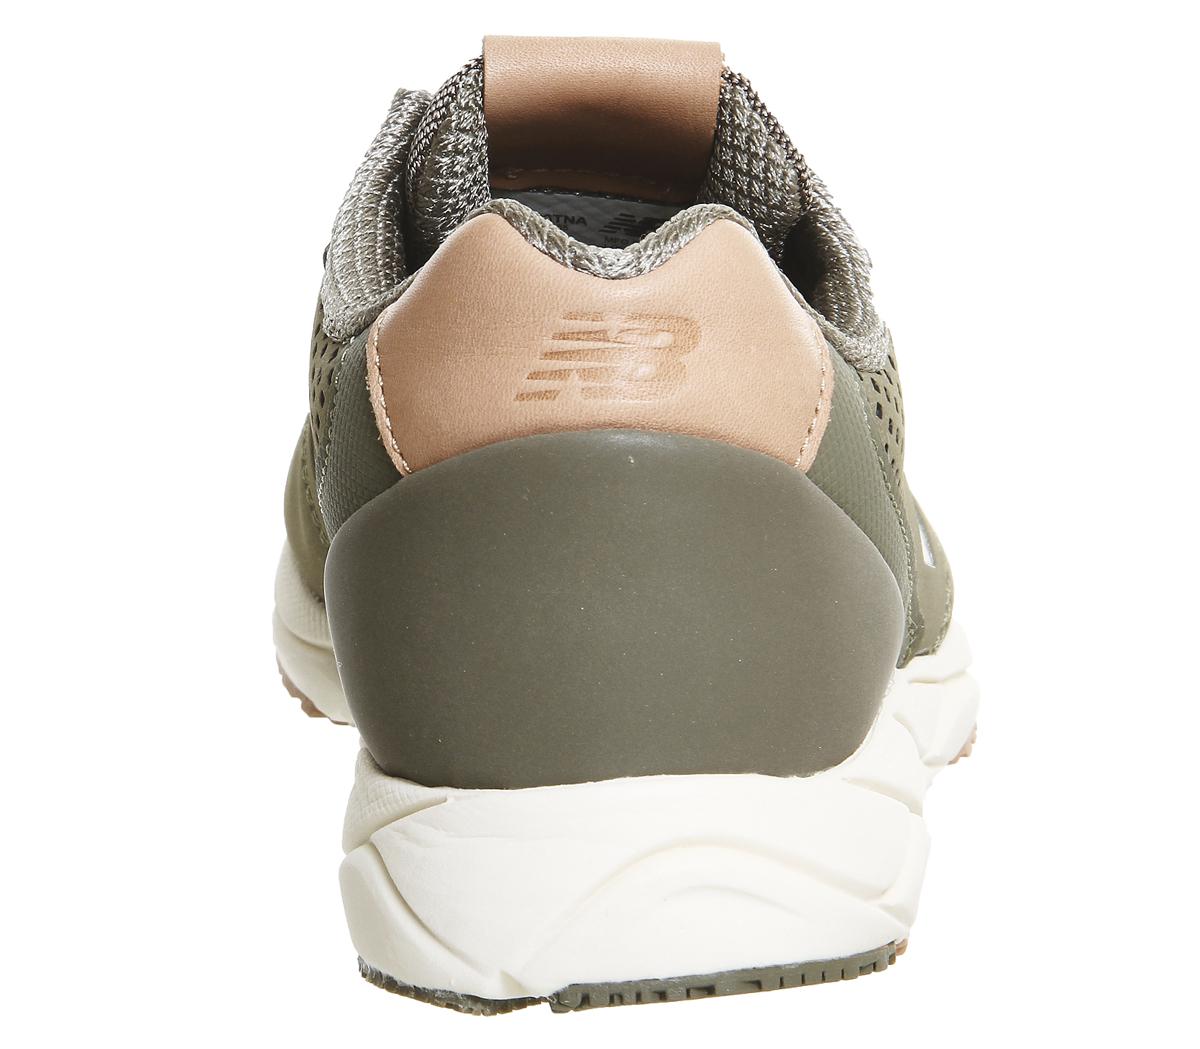 New Balance Suede Wrt96 in Khaki (Natural) - Lyst